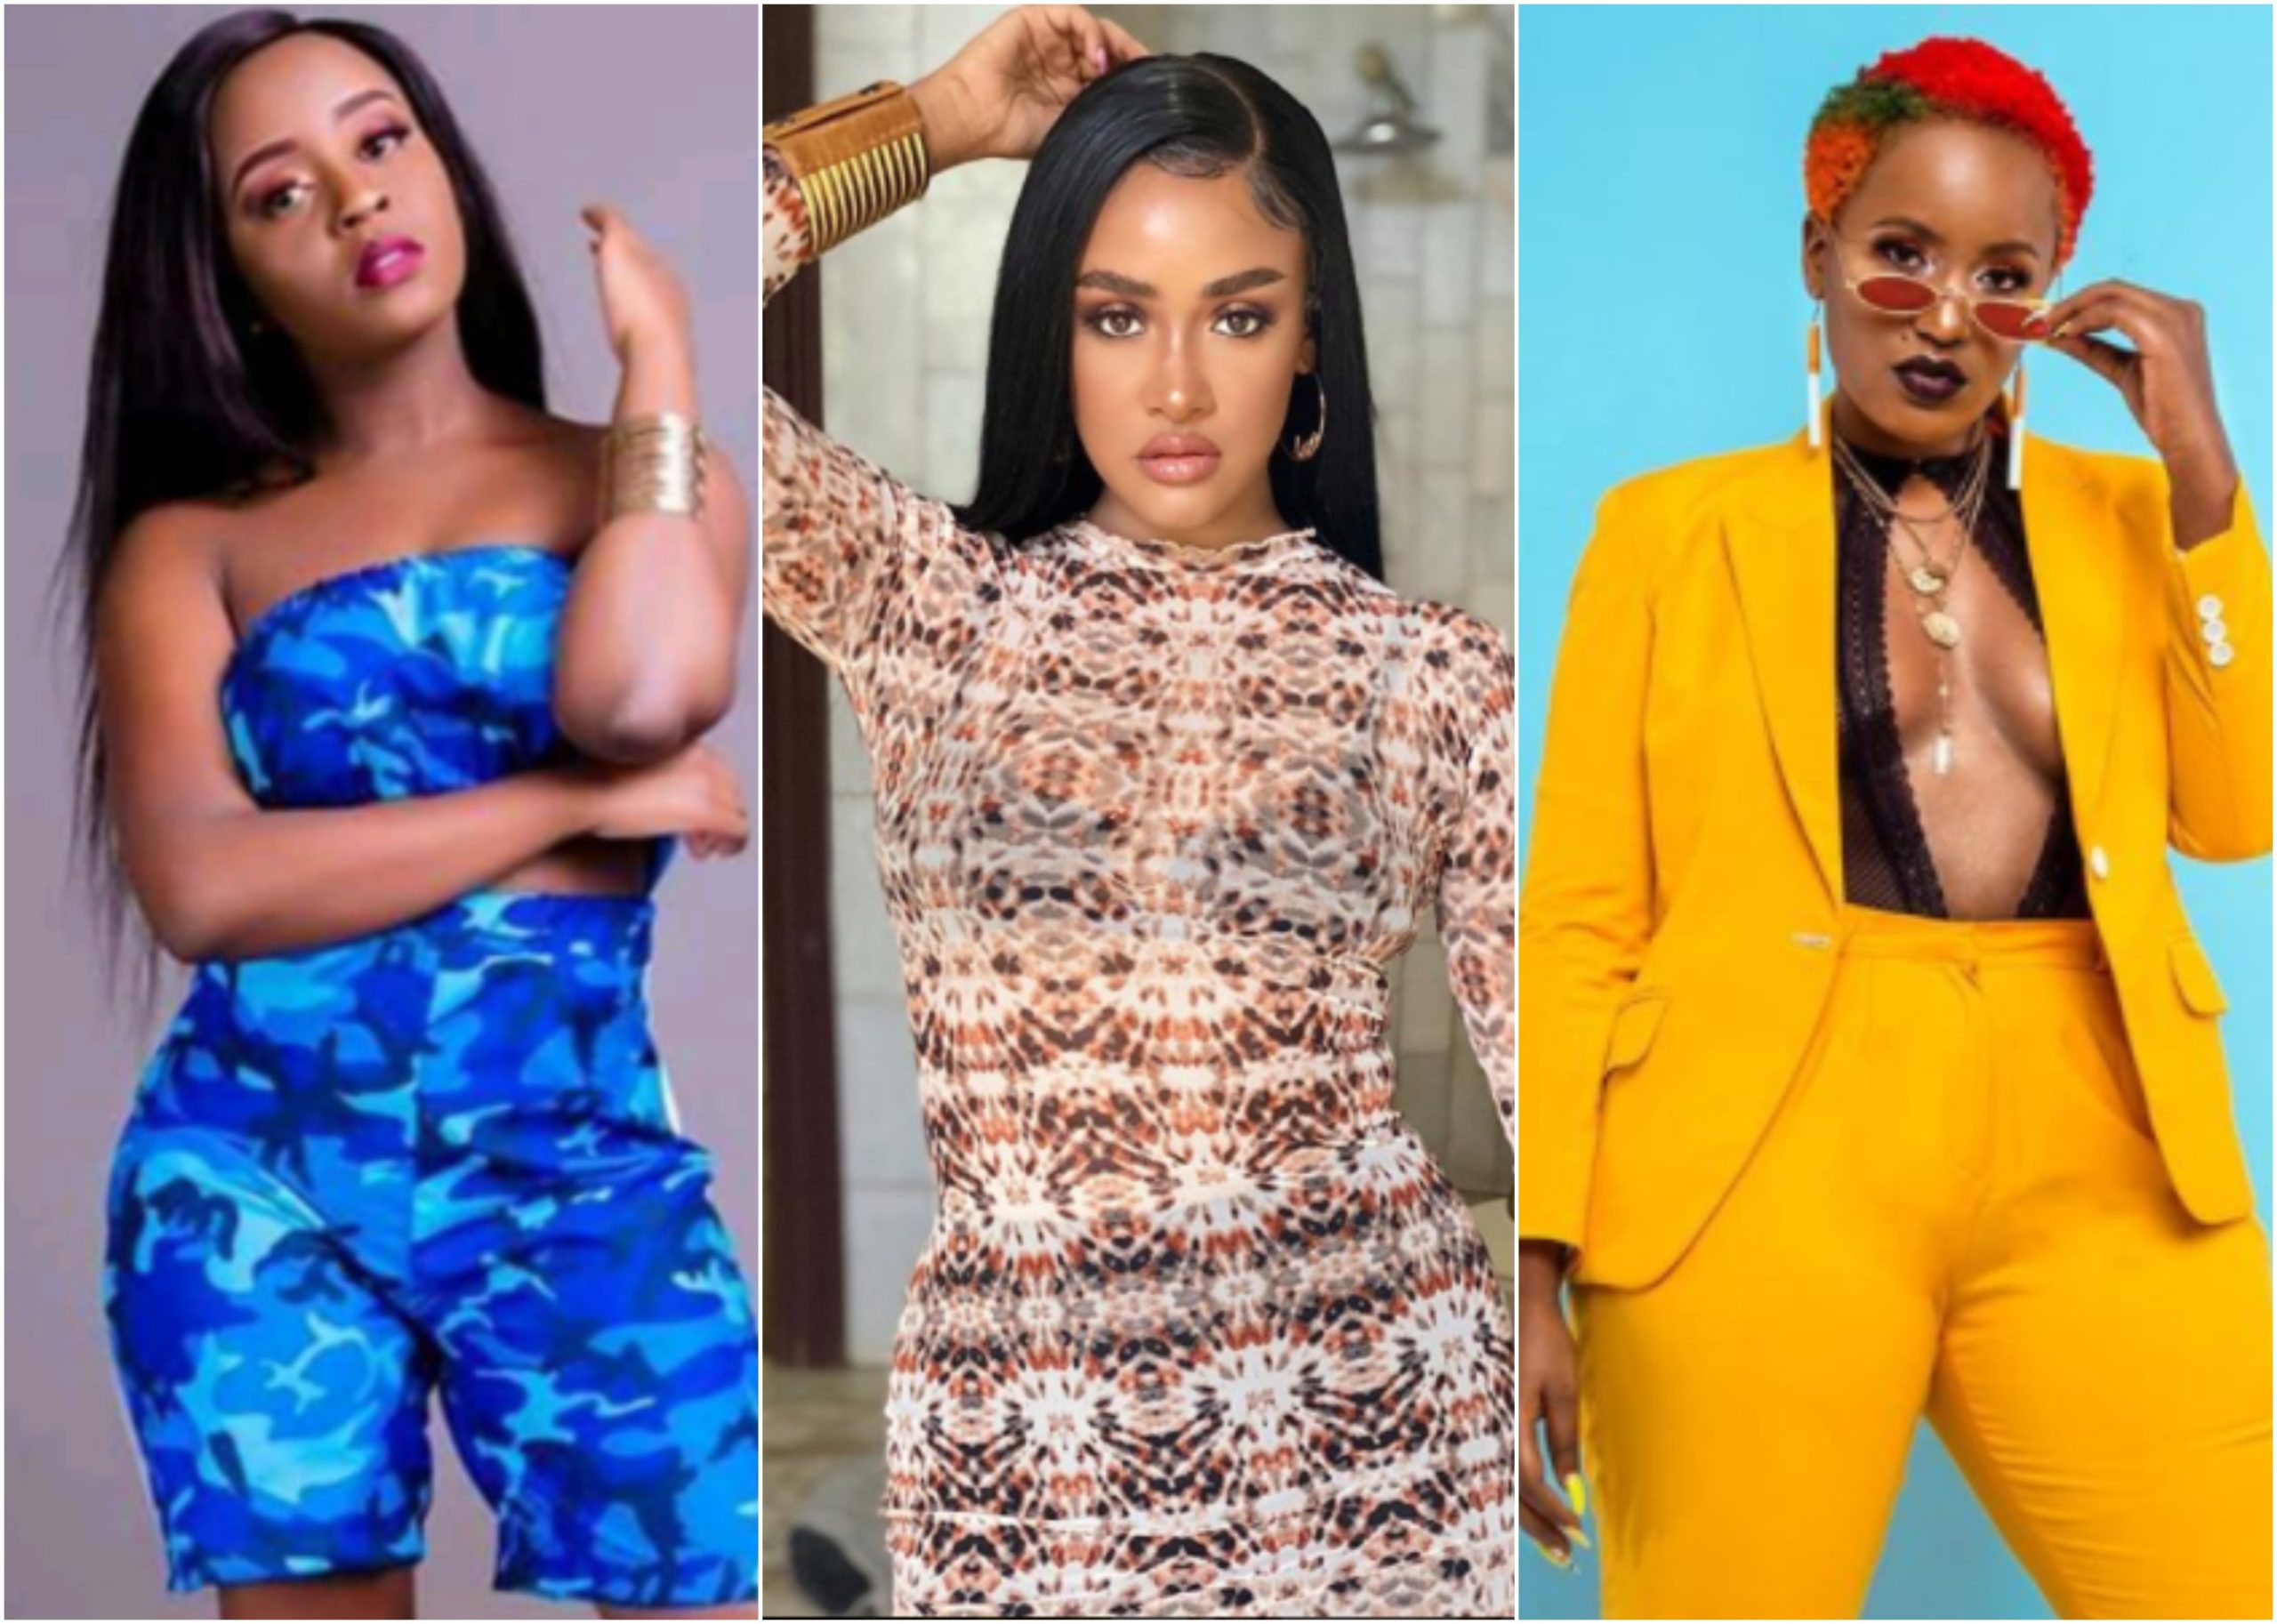 Nadia Mukami beats Tanasha Donna, Femi One and Vivianne as the hottest female artist in top charts